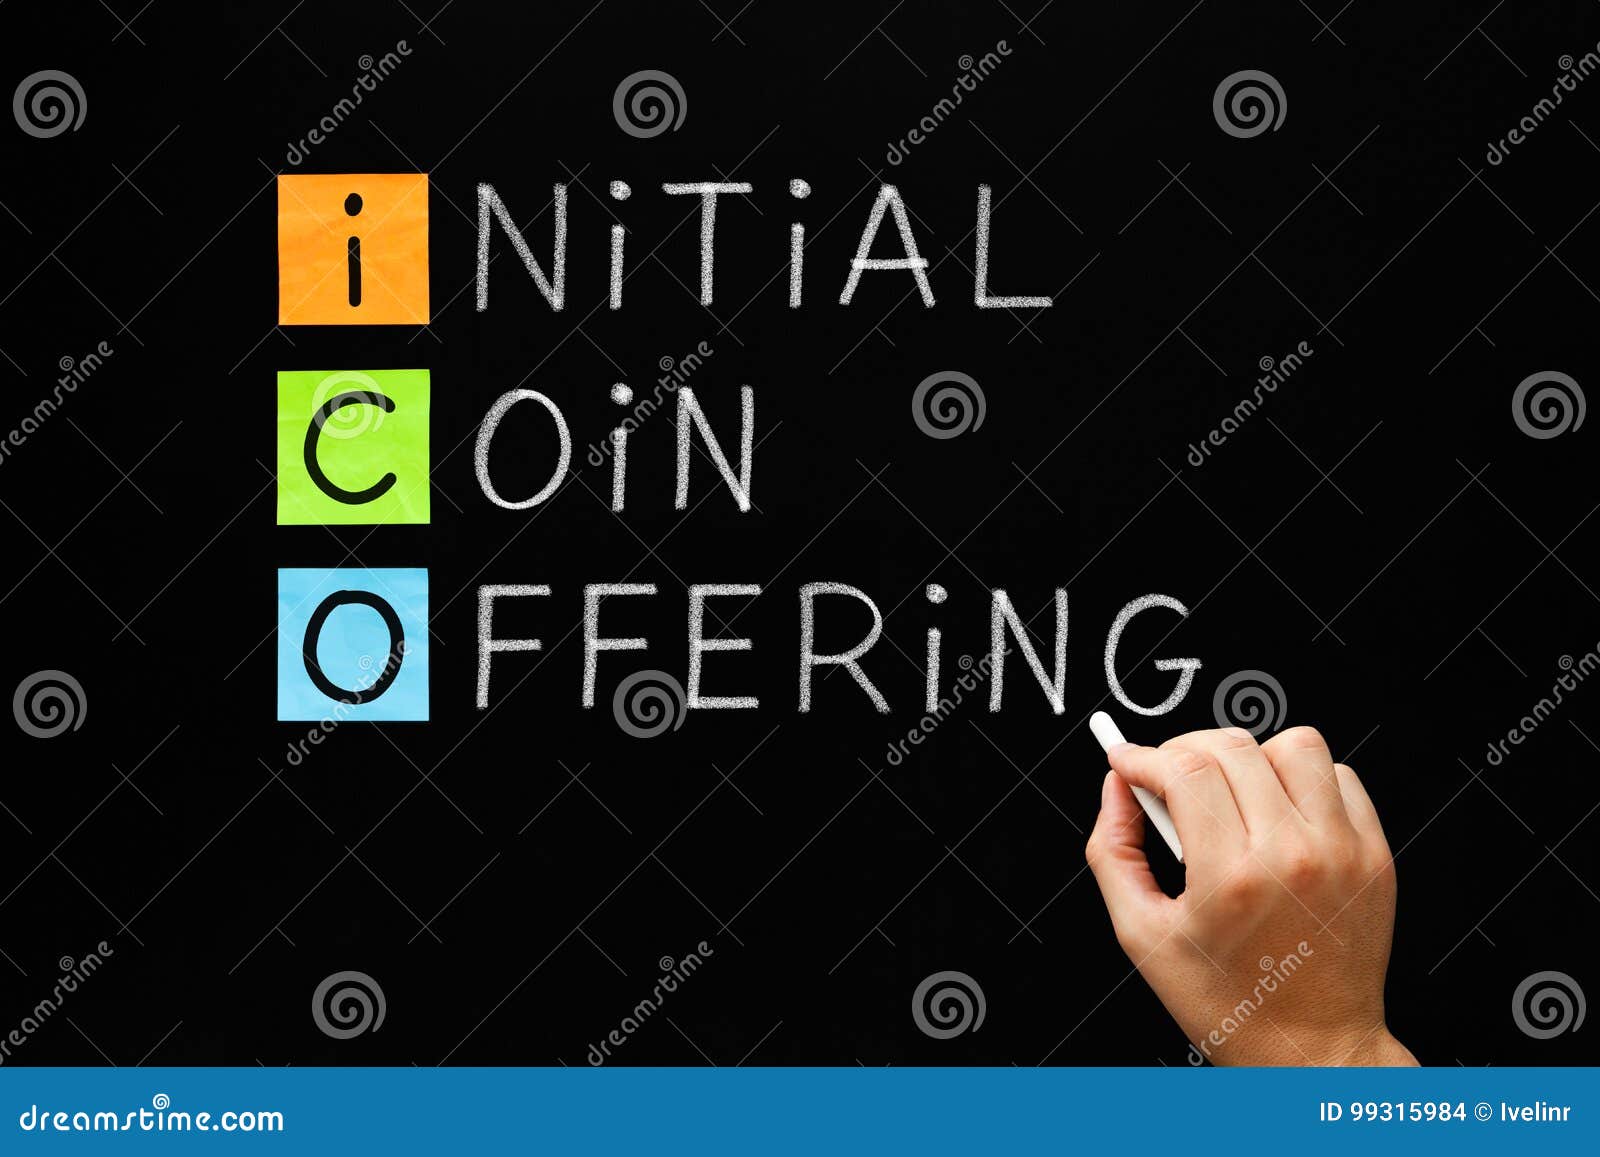 ico - initial coin offering